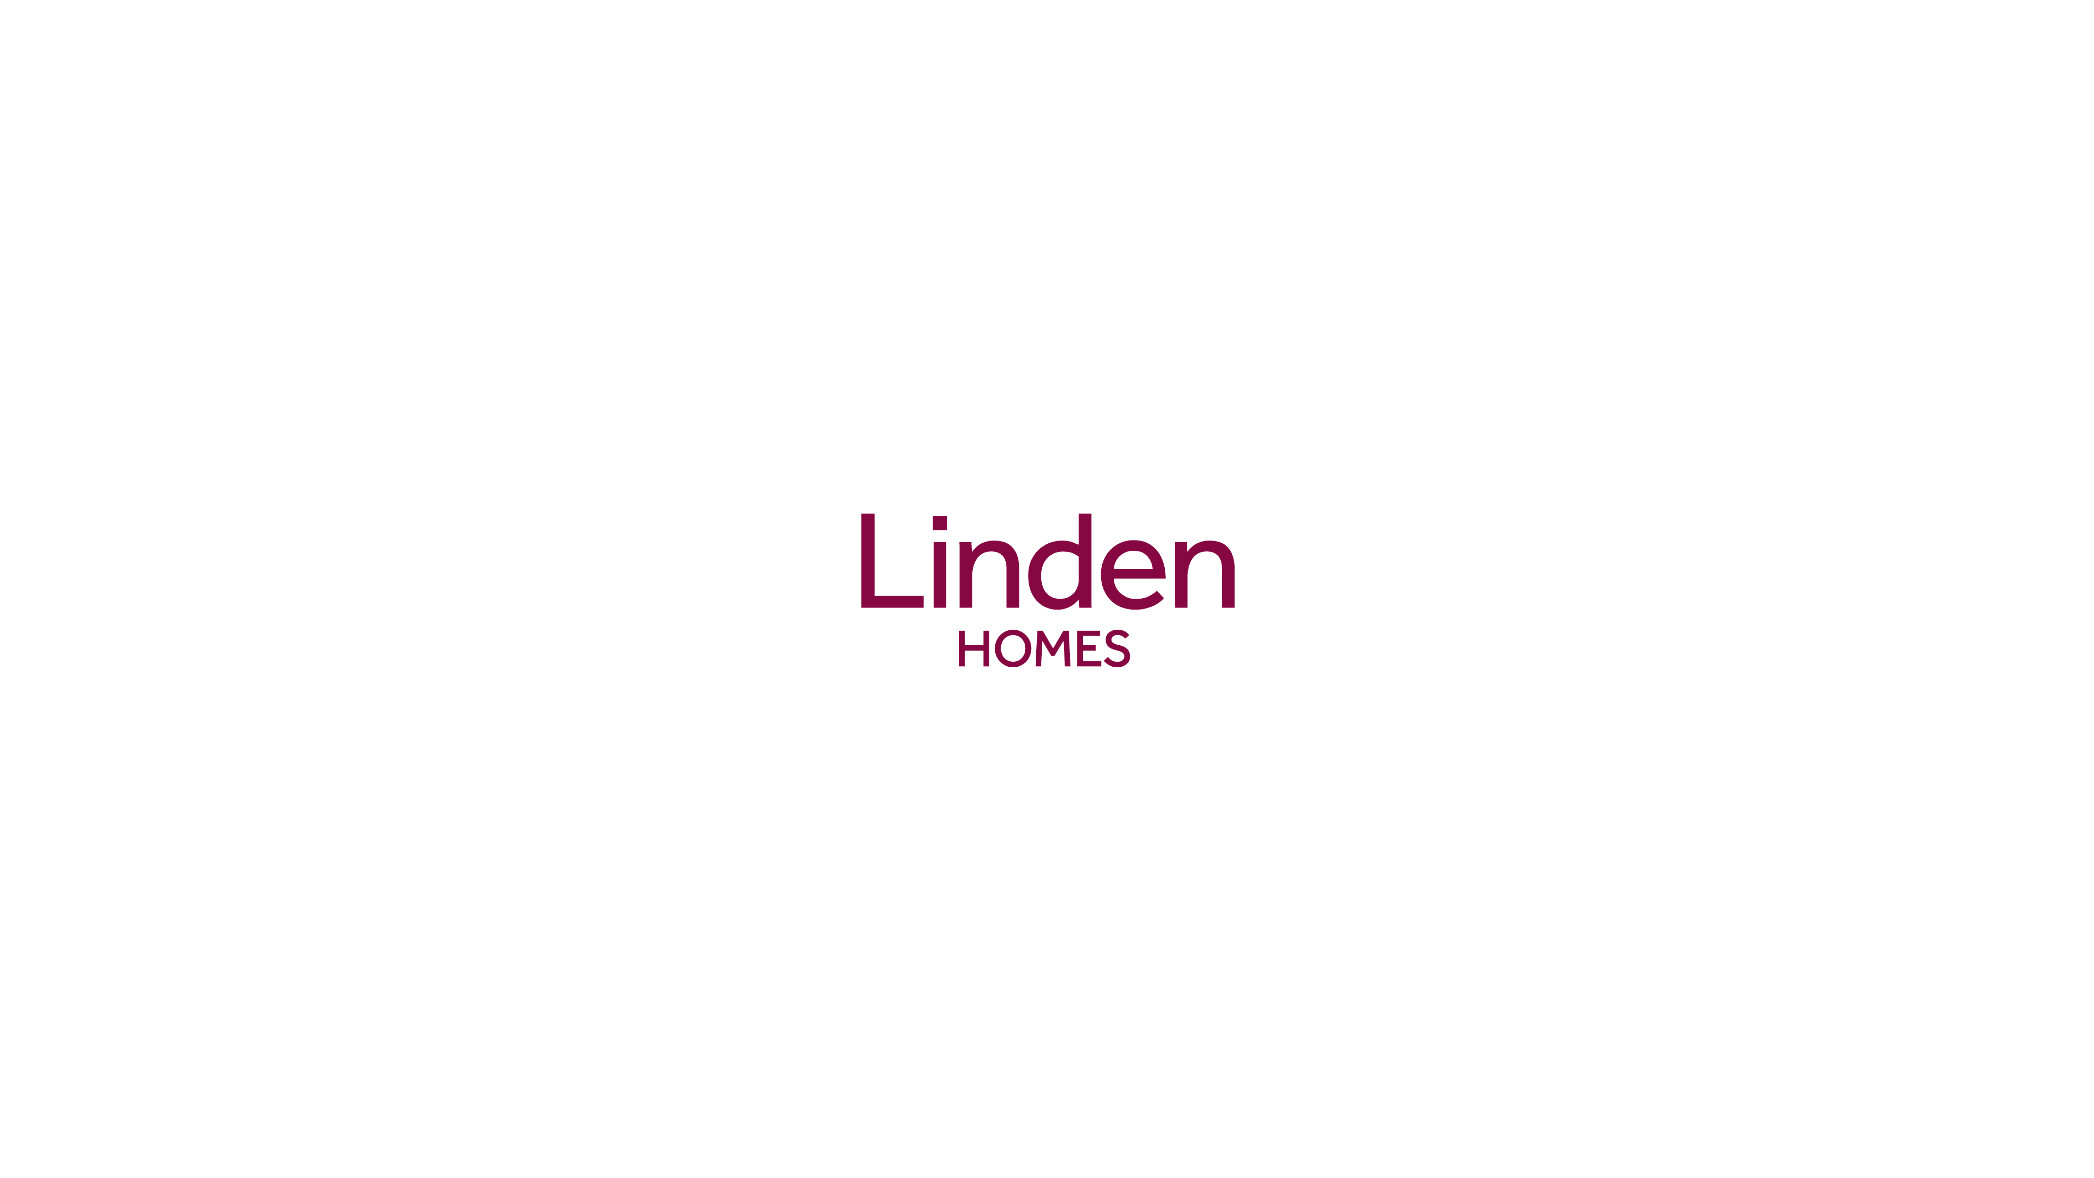 A development by Linden Homes